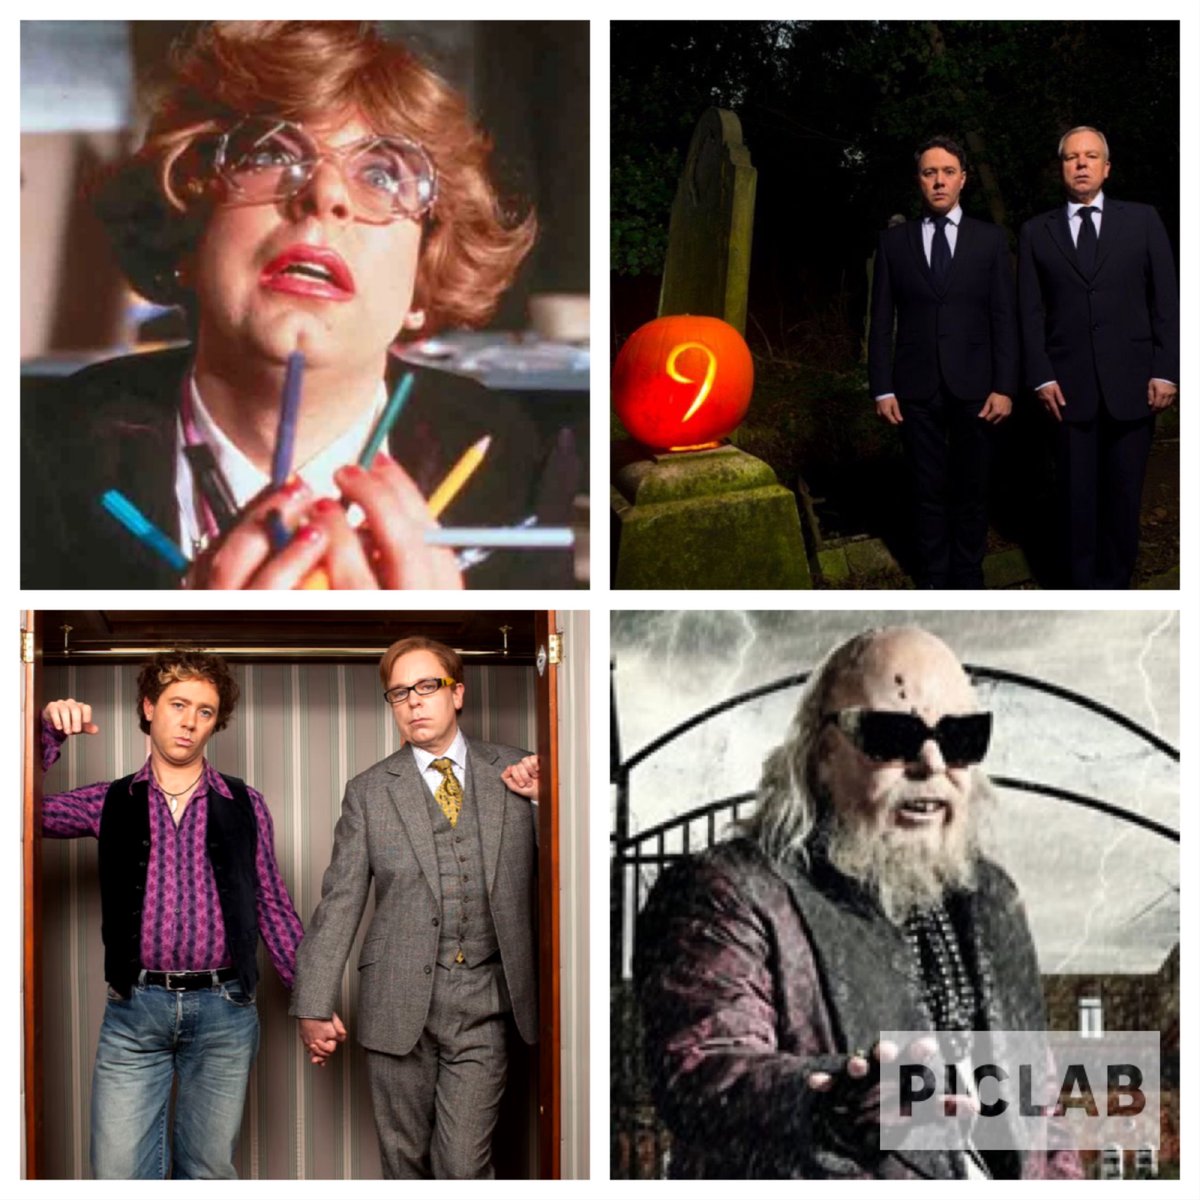 Did you know that 2024 will mark the 25th anniversary of #TheLeagueofGentlemen (1999), the 15th anniversary of #Psychoville (2009) and the 10th anniversary of #InsideNo9 (2014). How do we best celebrate? And is it now time to retire?